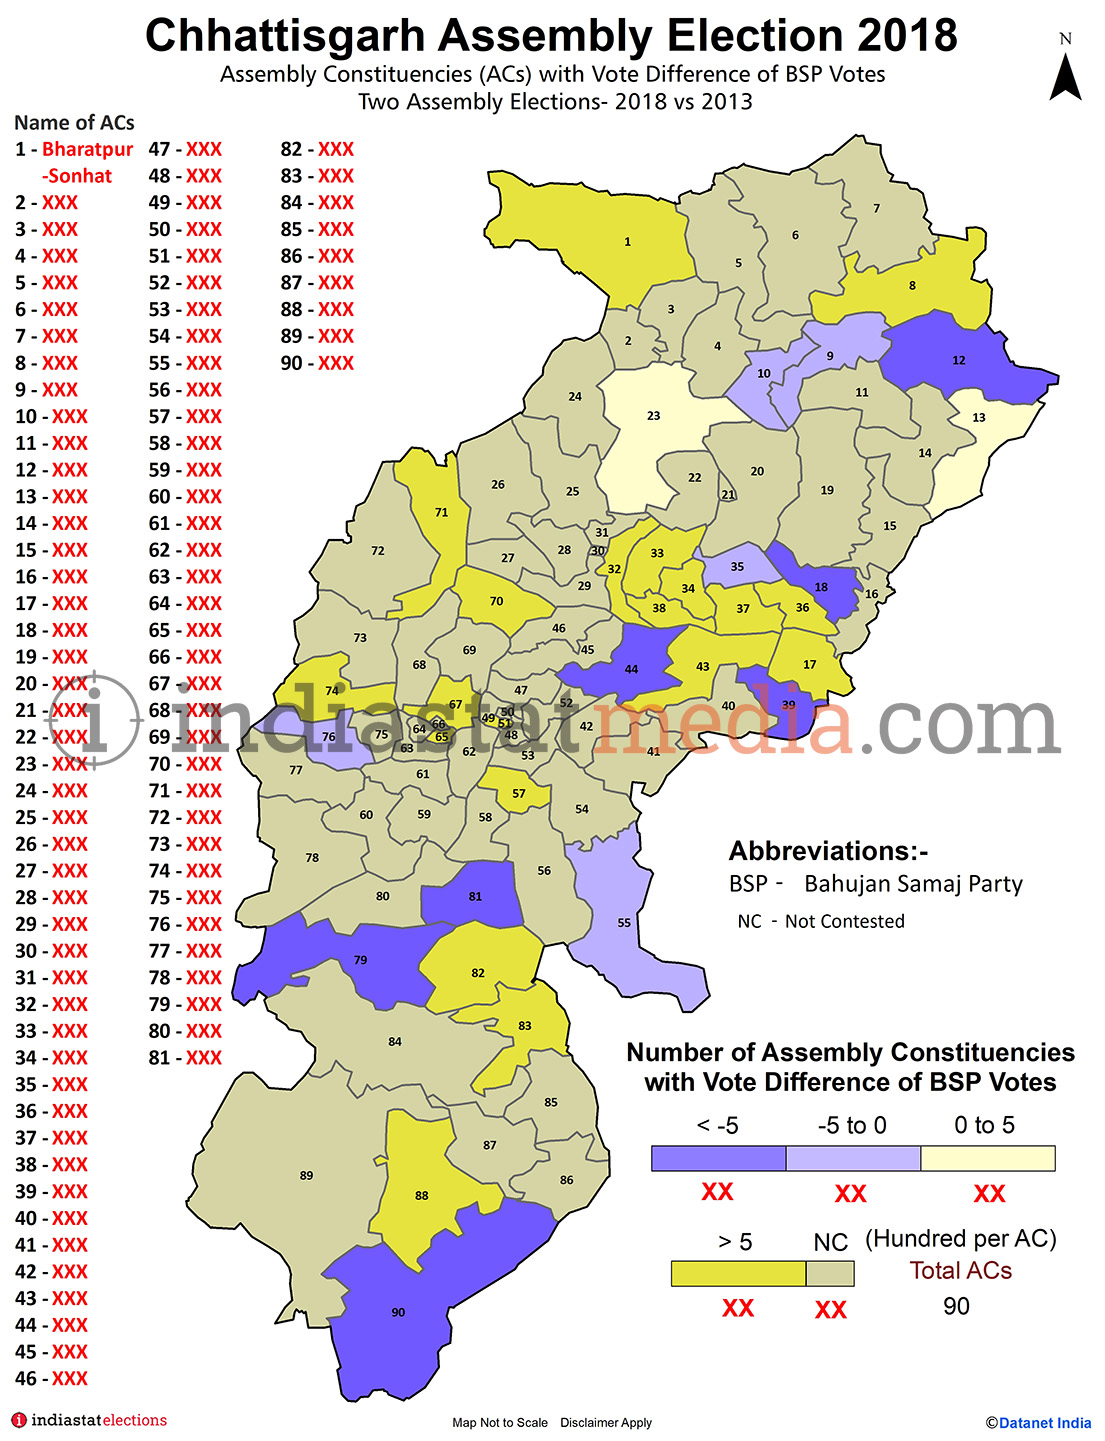 Assembly Constituencies with Vote Difference of BSP Votes in Chhattisgarh (Assembly Elections - 2013 & 2018)